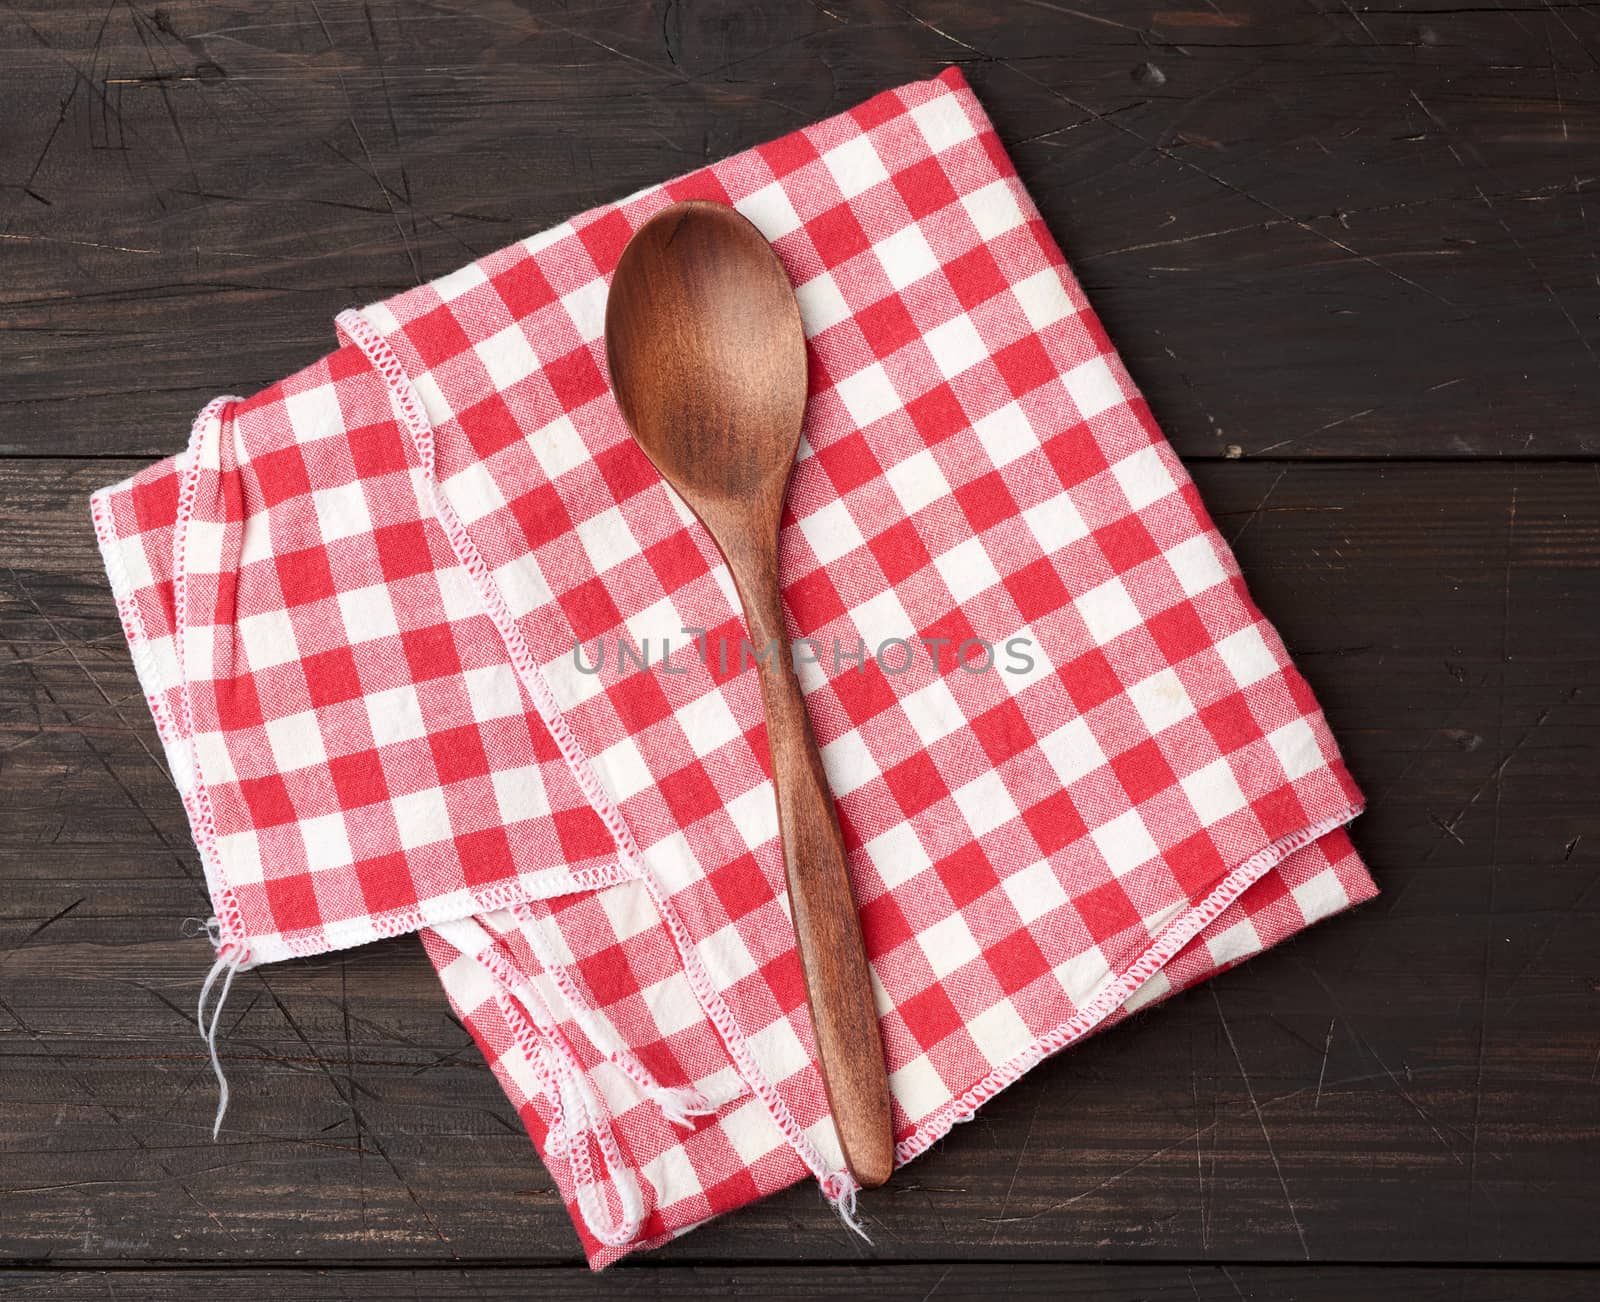 wooden spoon and red textile kitchen towel on brown wooden backg by ndanko